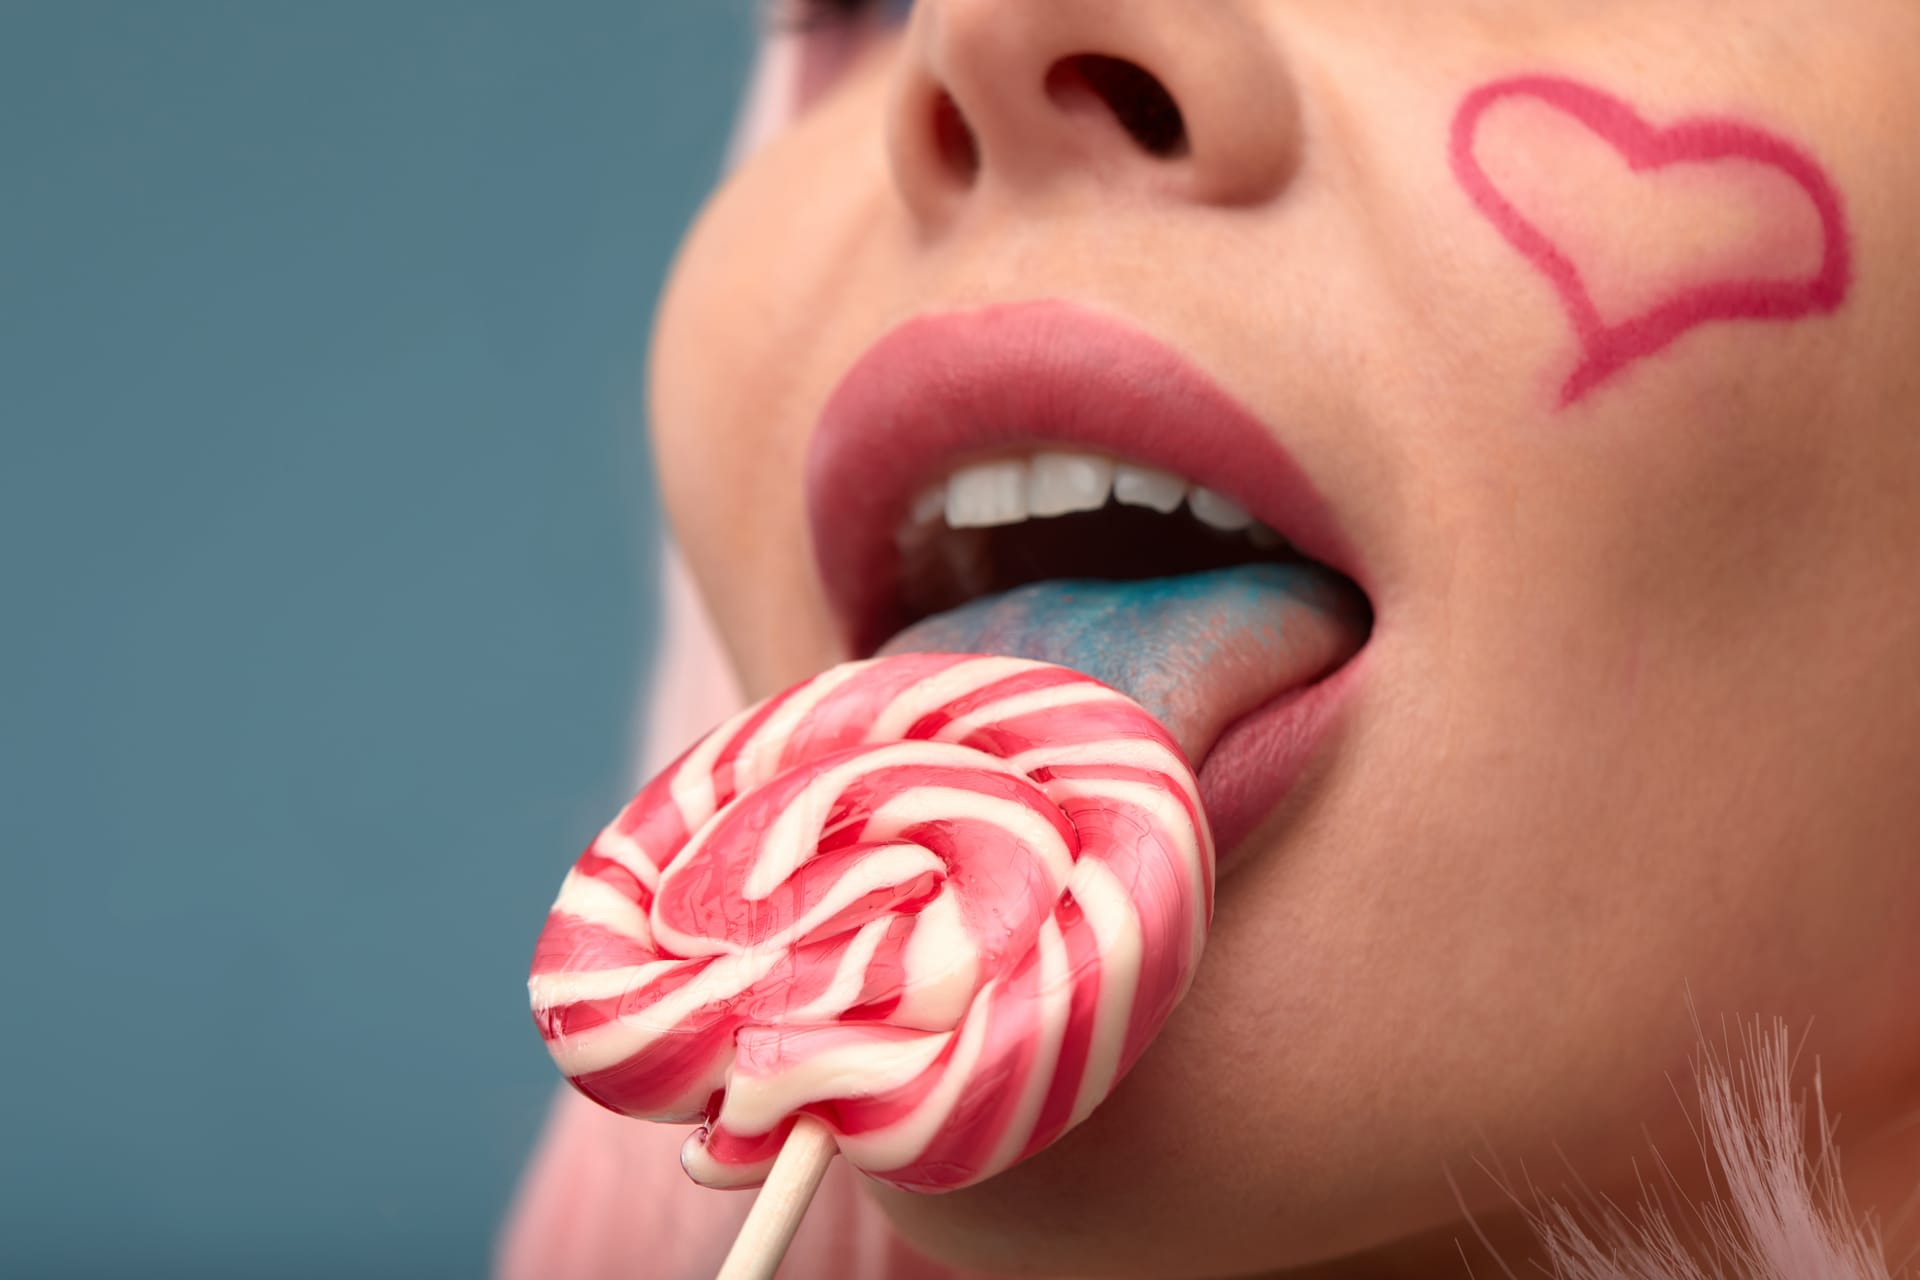 With candy mouth pretty glamorous woman pink hair charm sweets lifestyle enjoyment sugar